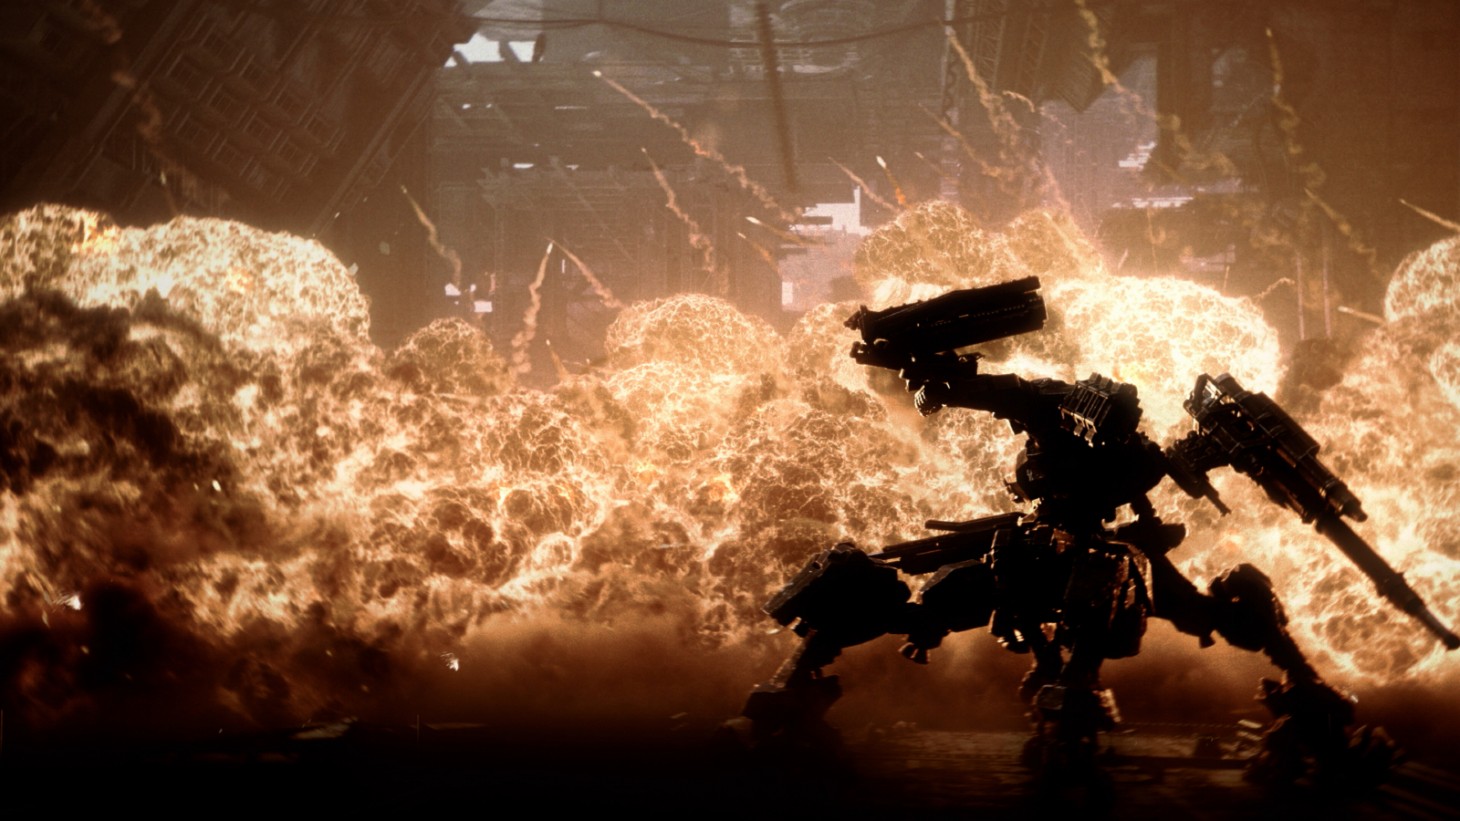 Armored Core 6  gameplay beats Starfield and Cyberpunk in views